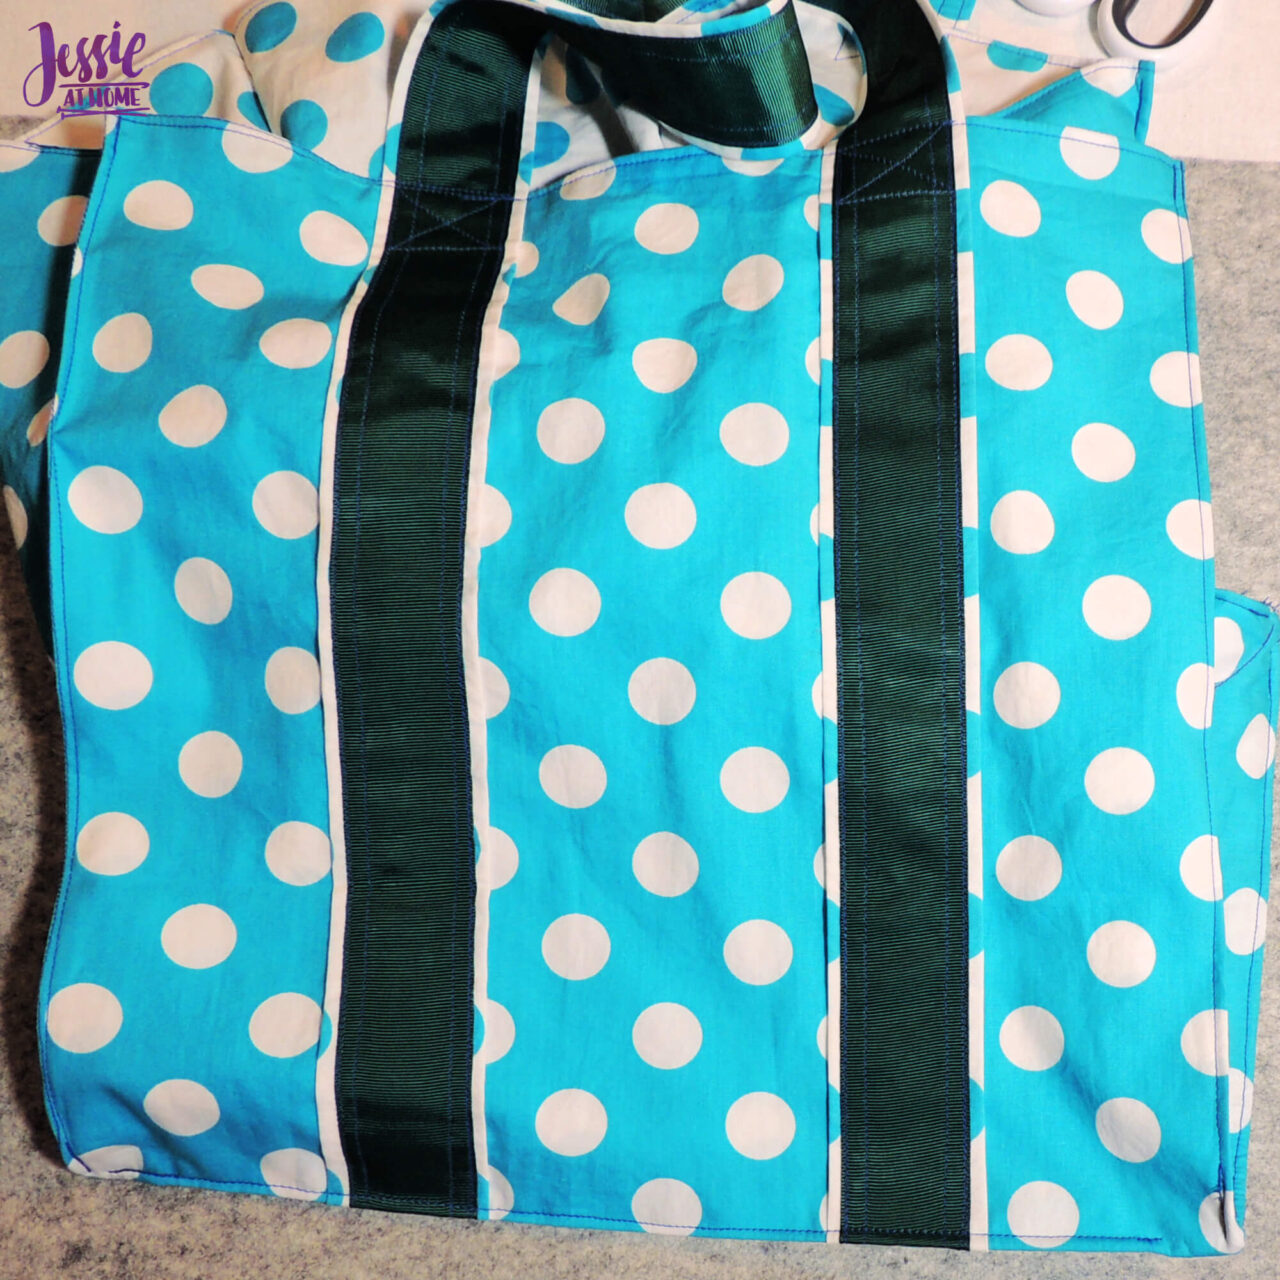 Washable Grocery Bags Sewing Tutorial | Jessie At Home